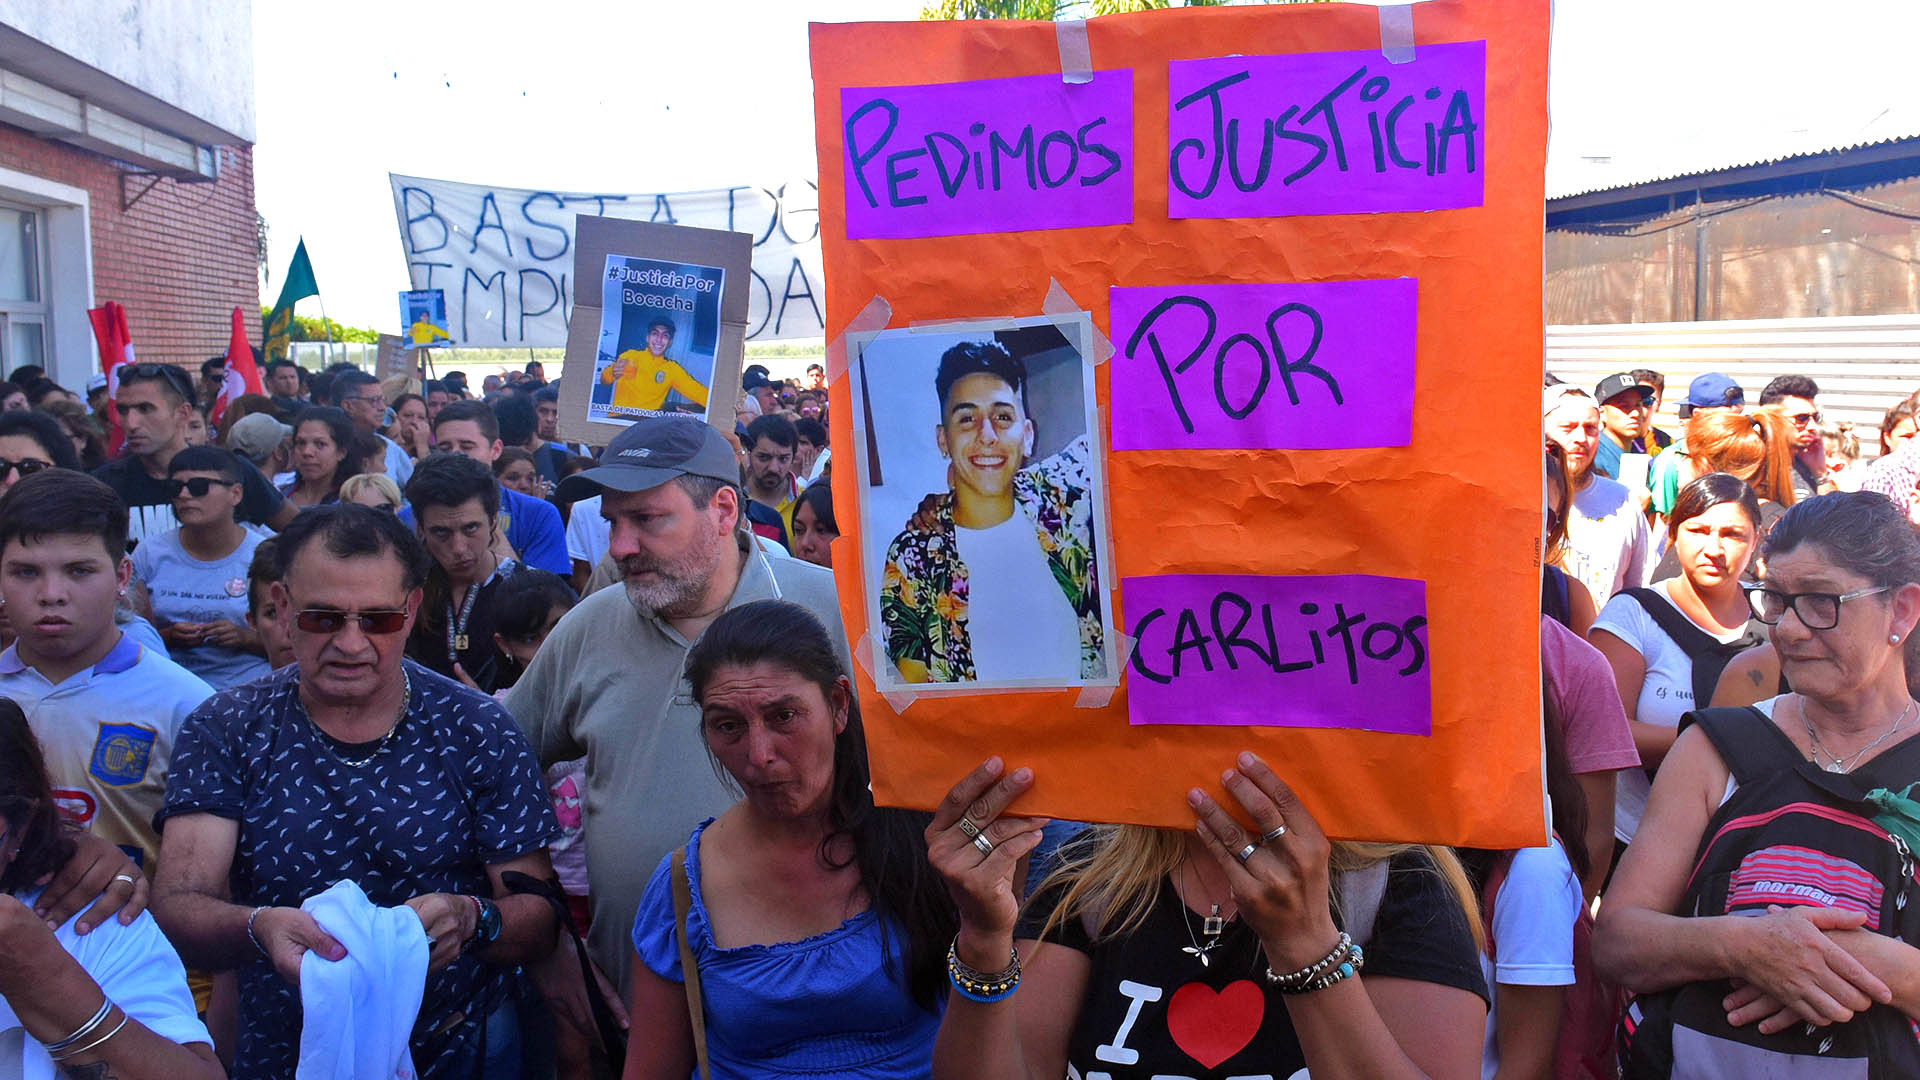 Relatives and friends of Carlos Orellano, the young man who was found dead yesterday in the Paraná River, demand justice in front of the Ming House River bowling alley.  (Photo: Sebastian Granata/telam/cgl)